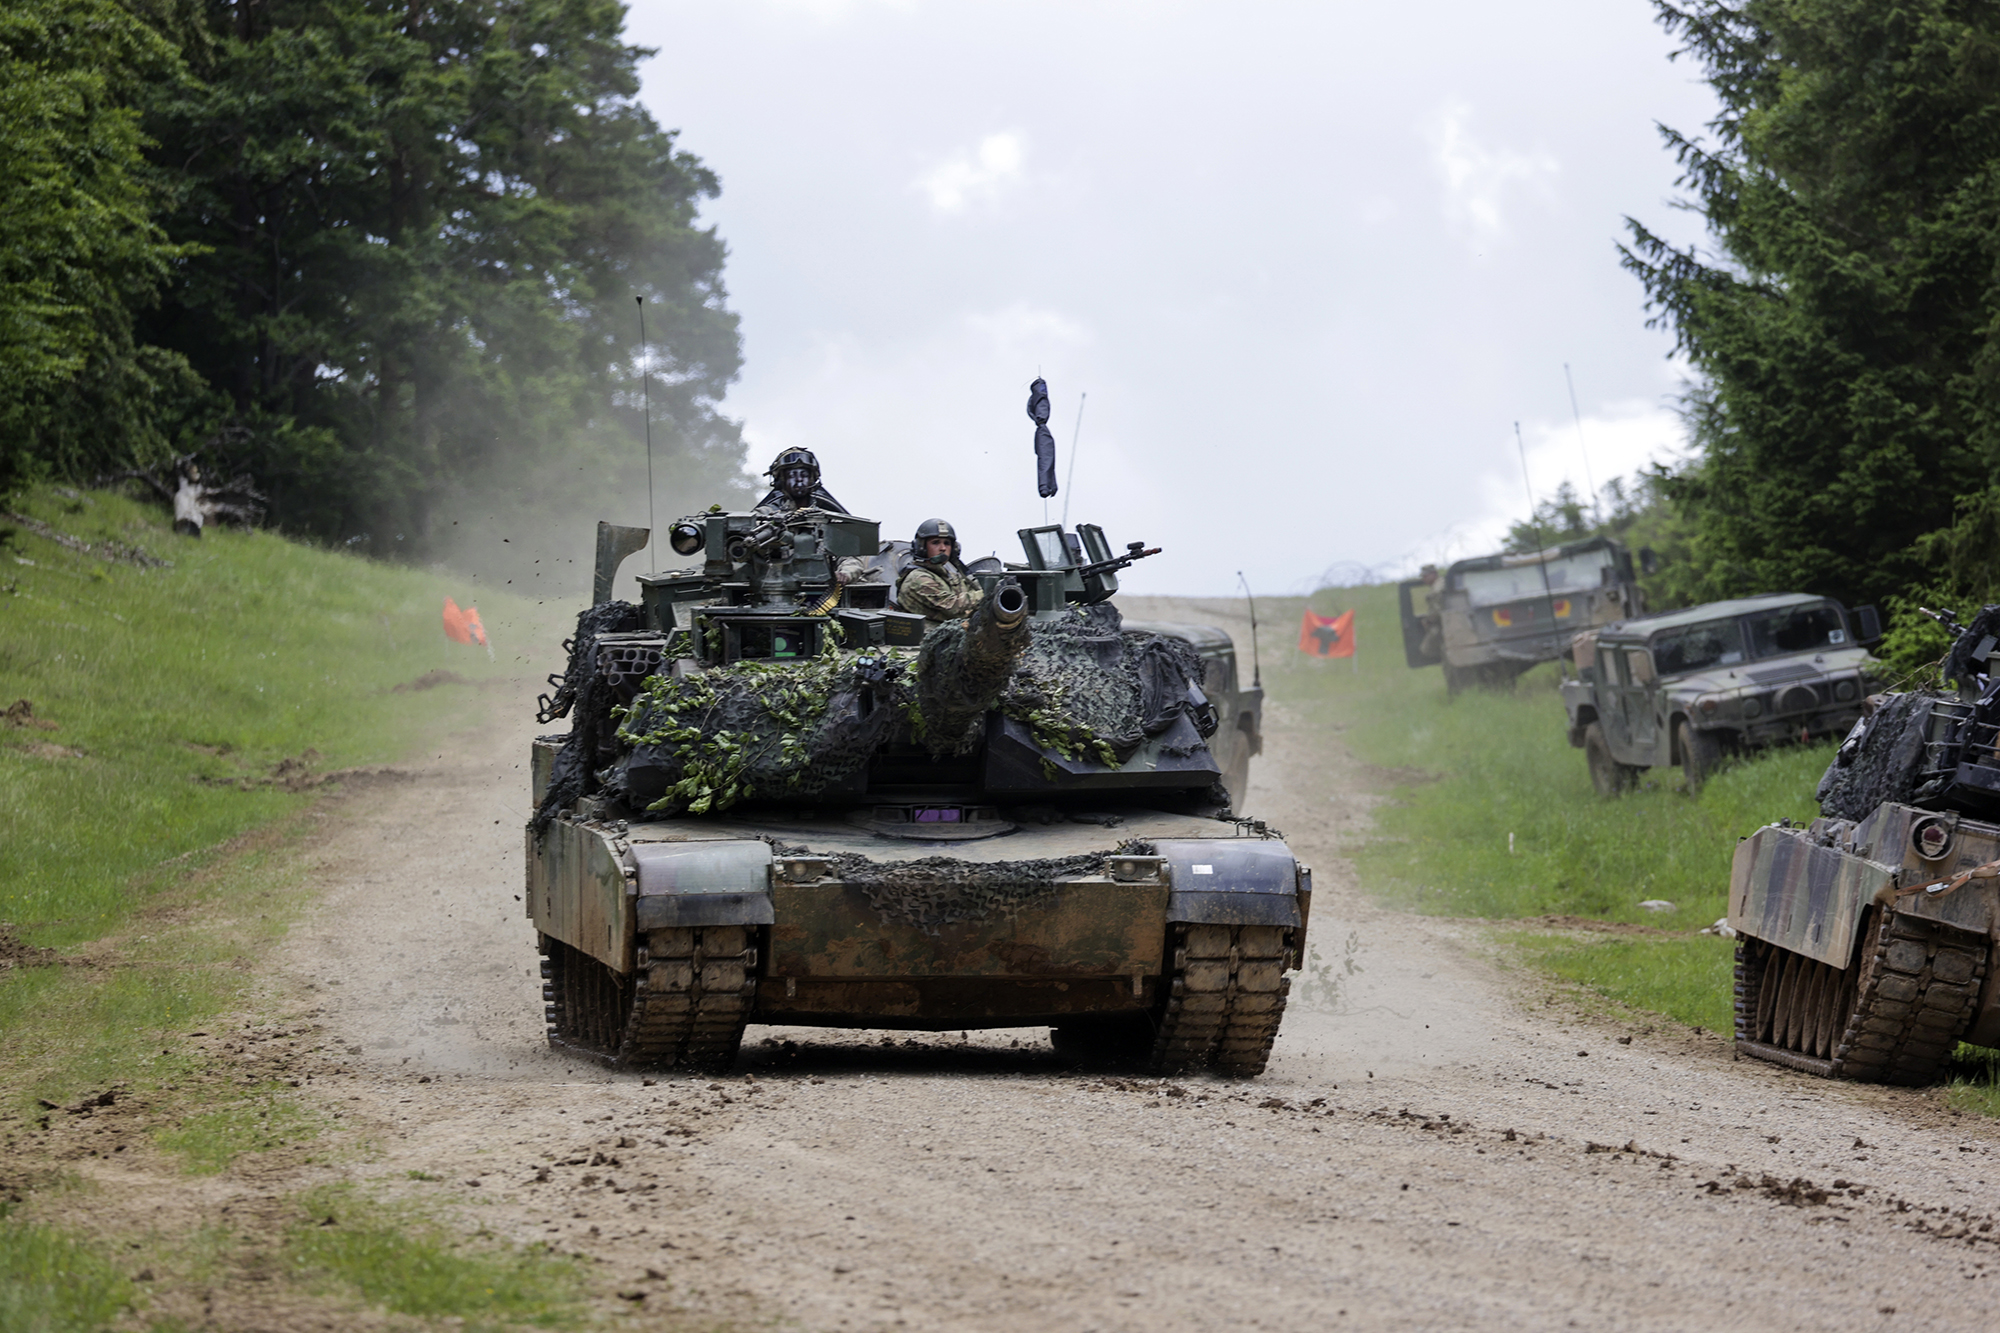 A US Army M1A1 Abrams battle tank during the Combined Resolve 17 multinational training exercise at the Hohenfels Training Area in Hohenfels, Germany, on June 8.